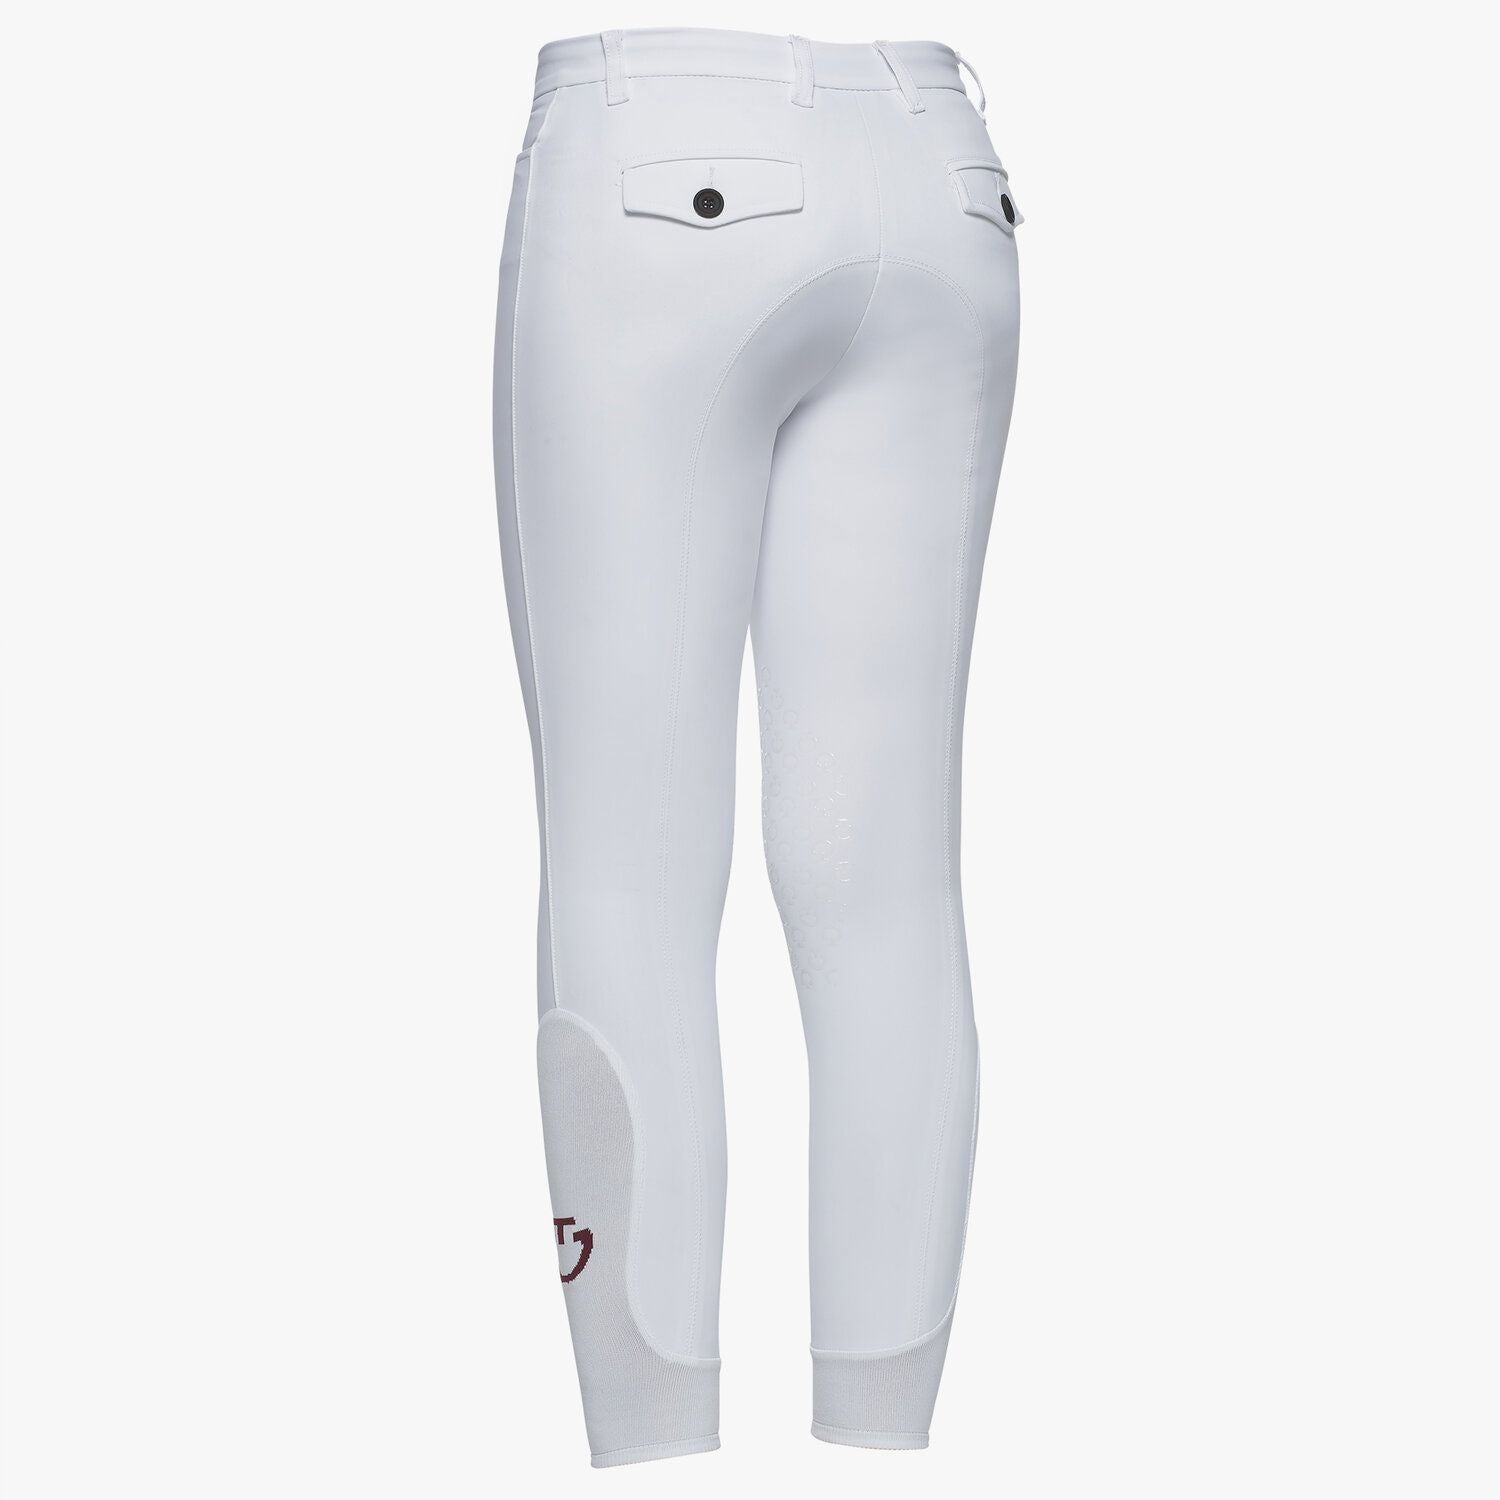 product shot image of the Boys Riding Breeches - White